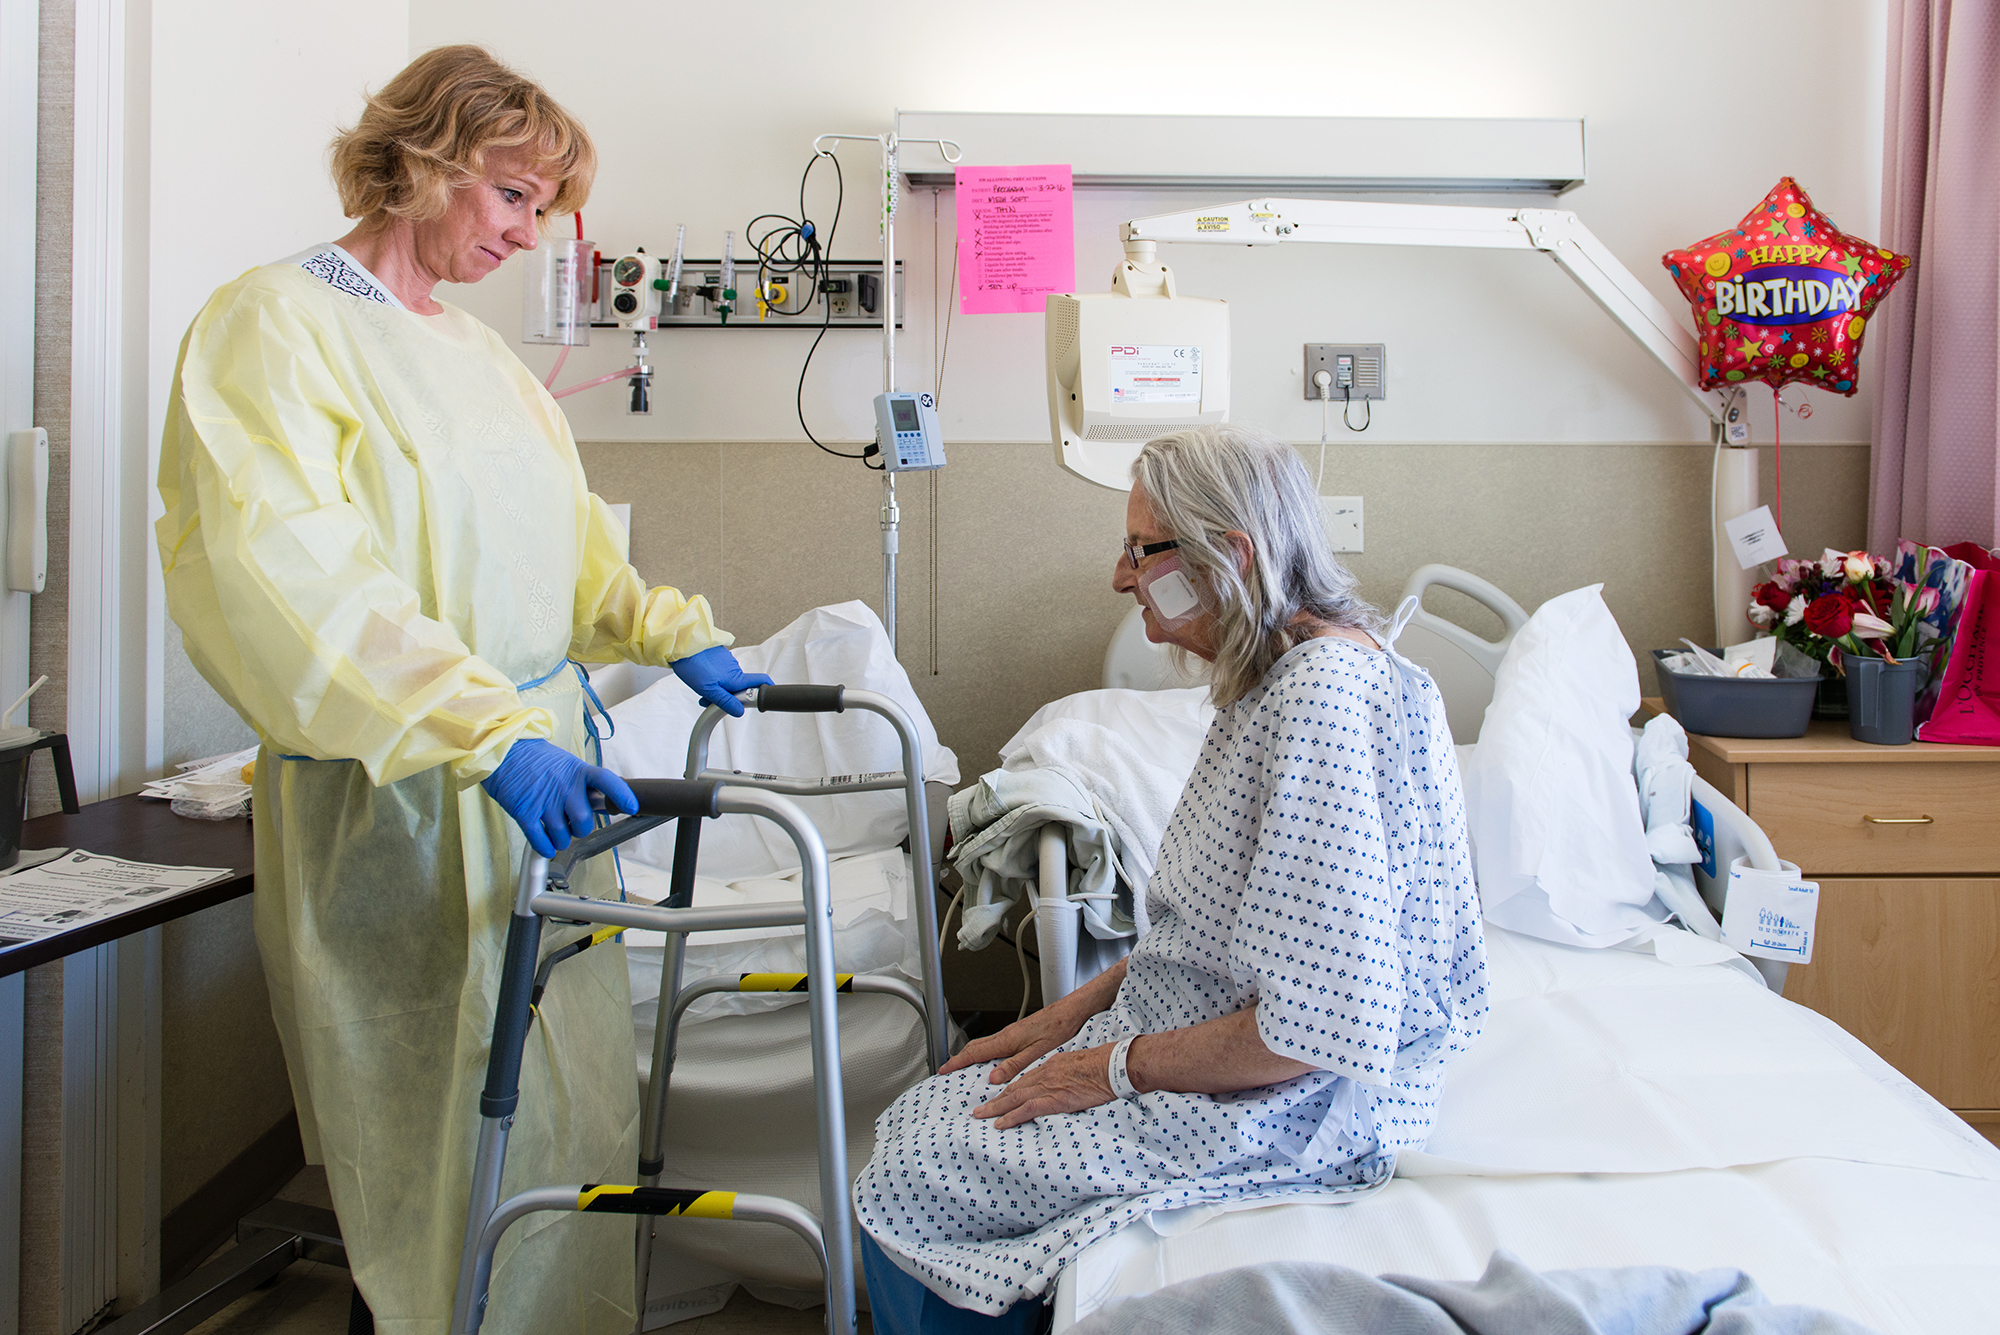 Nurse specialist Annelie Nilsson checks on patient Janet Prochazka, during her stay at the Zuckerberg San Francisco General Hospital, after Prochazka took a bad fall in March.